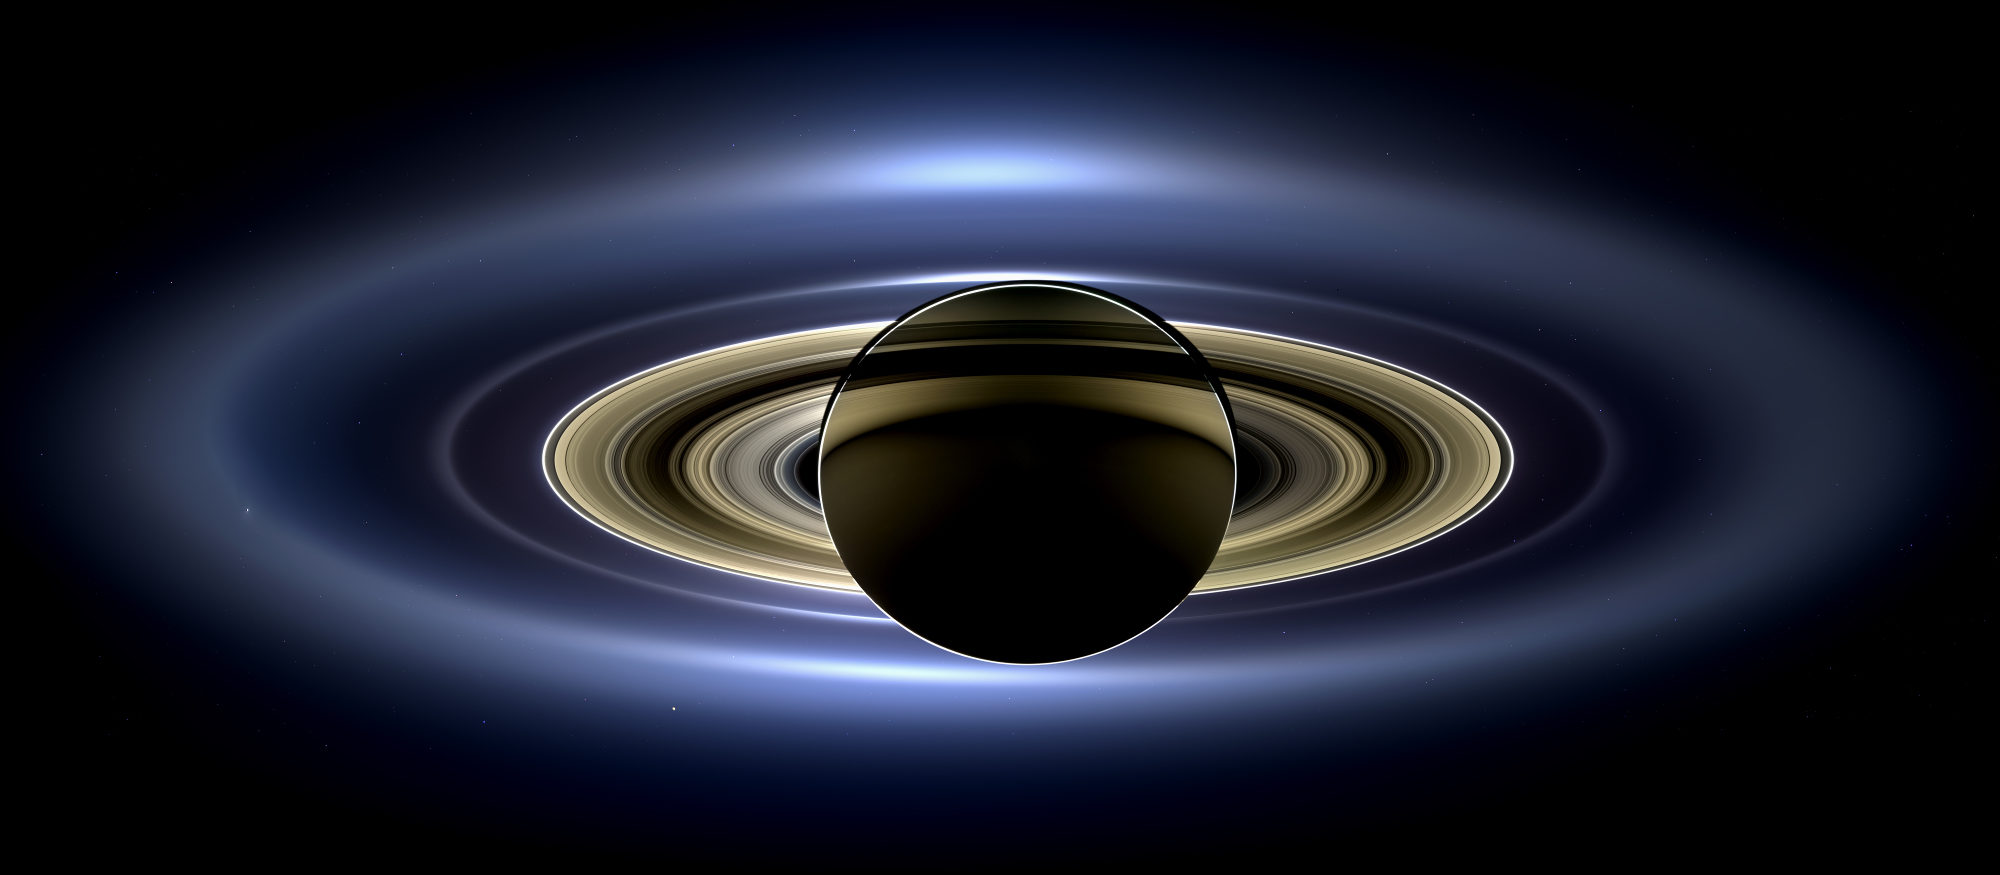 Saturn as seen by Cassini when the Sun is eclipsed by the planet.